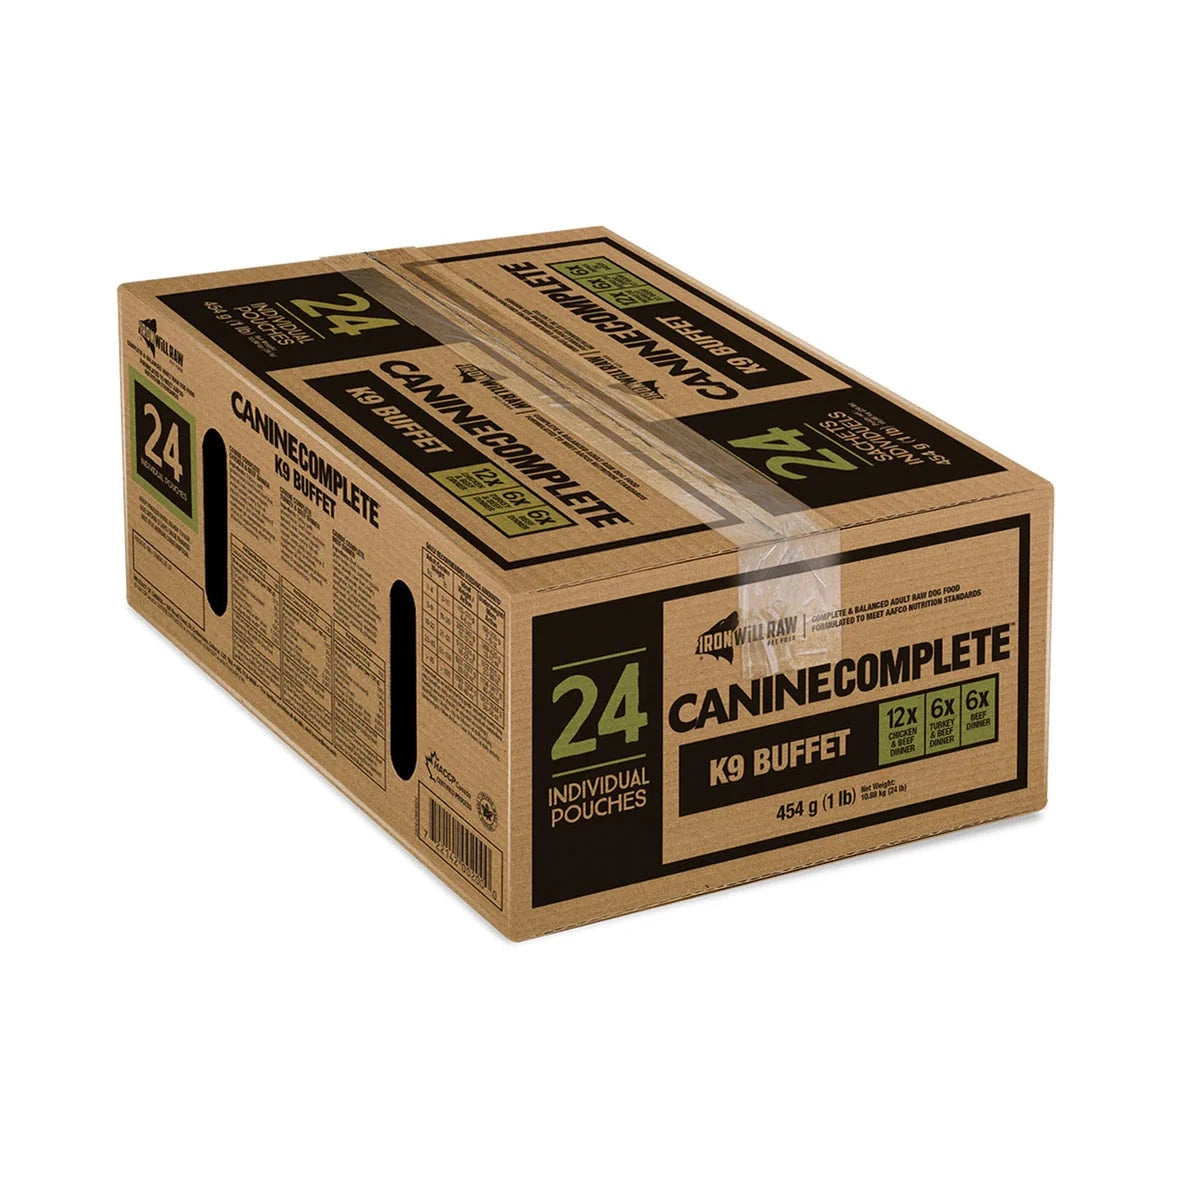 Canine Complete K9 Buffet -  24lb